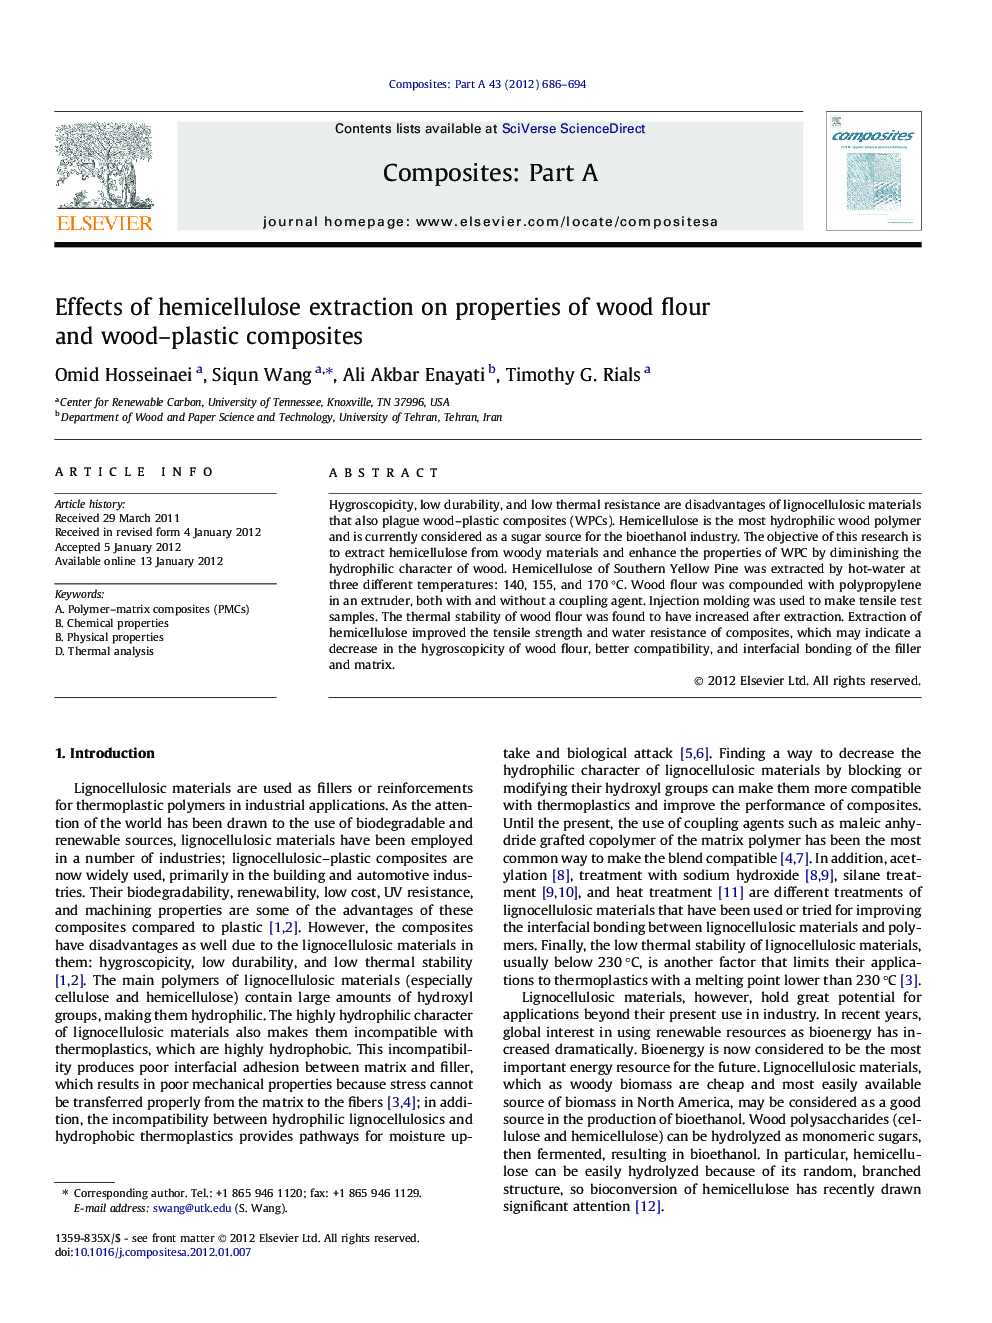 Effects of hemicellulose extraction on properties of wood flour and wood–plastic composites